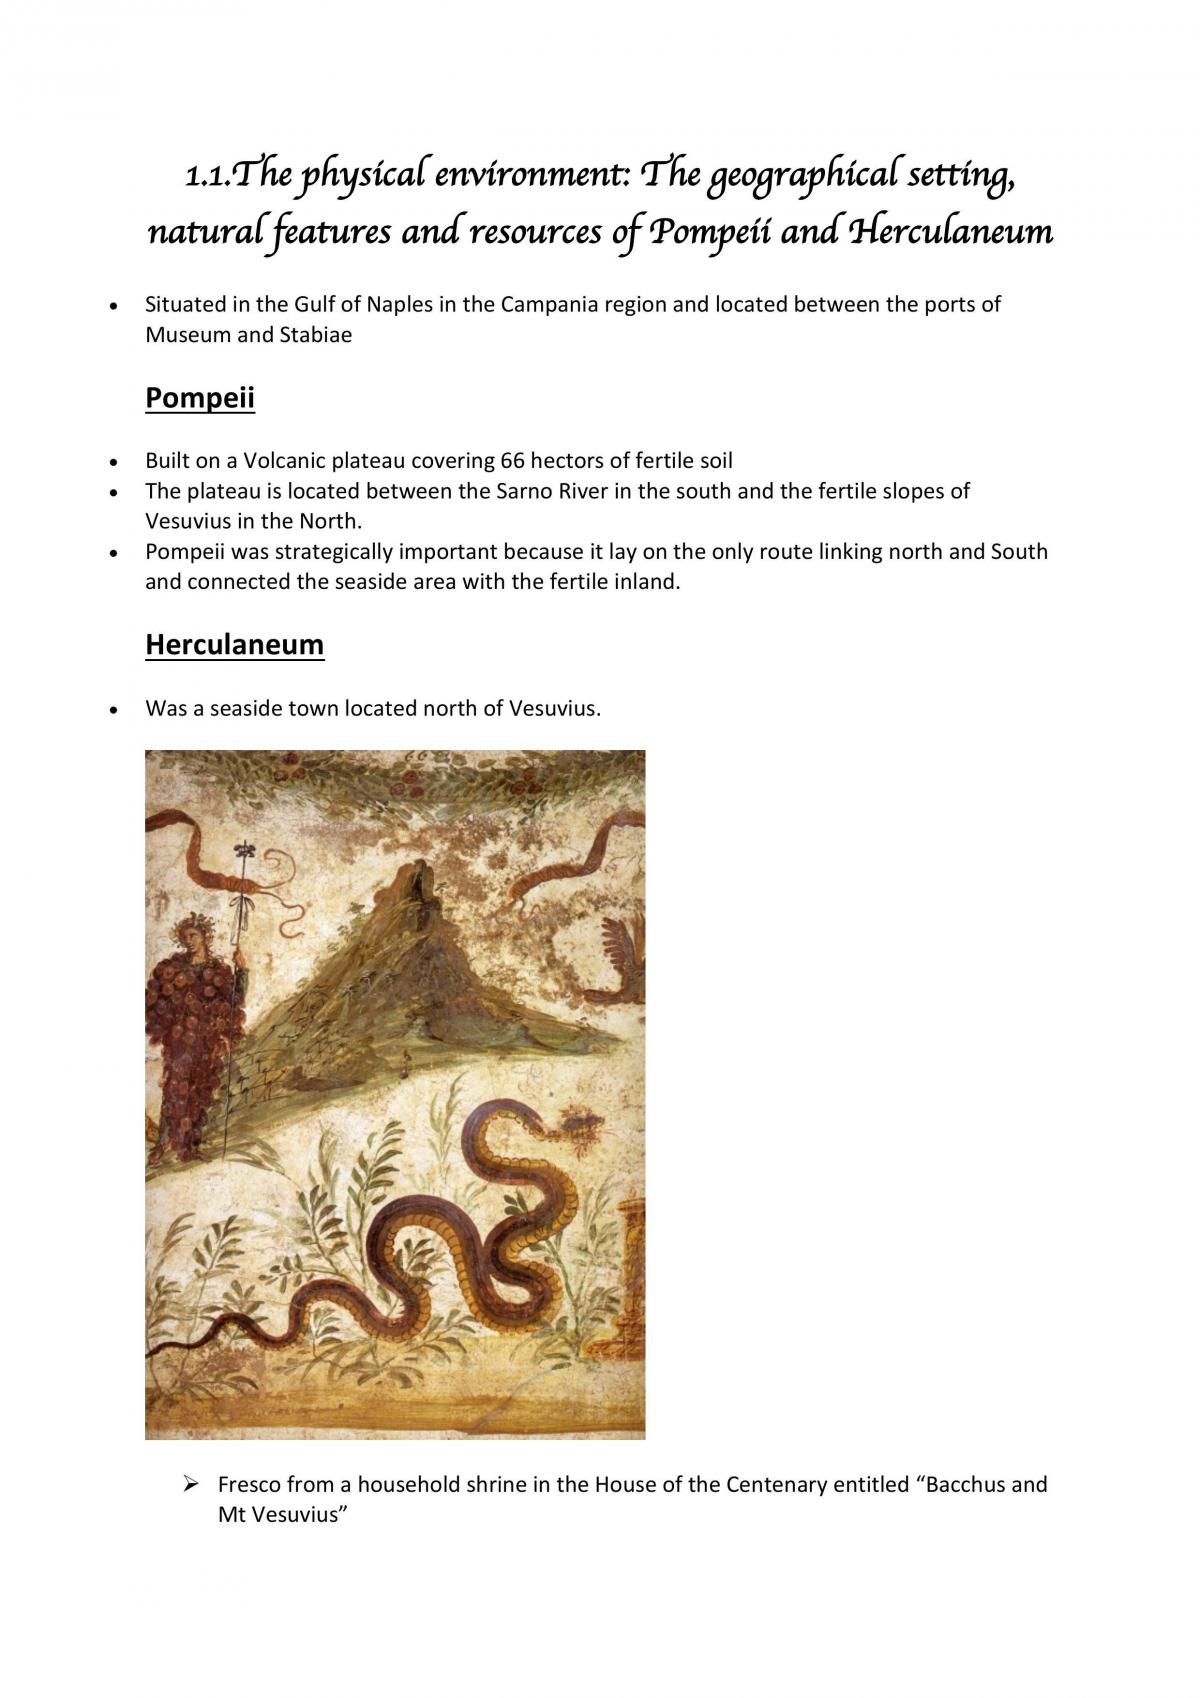 Complete Pompeii and Herculaneum Notes  - Page 1